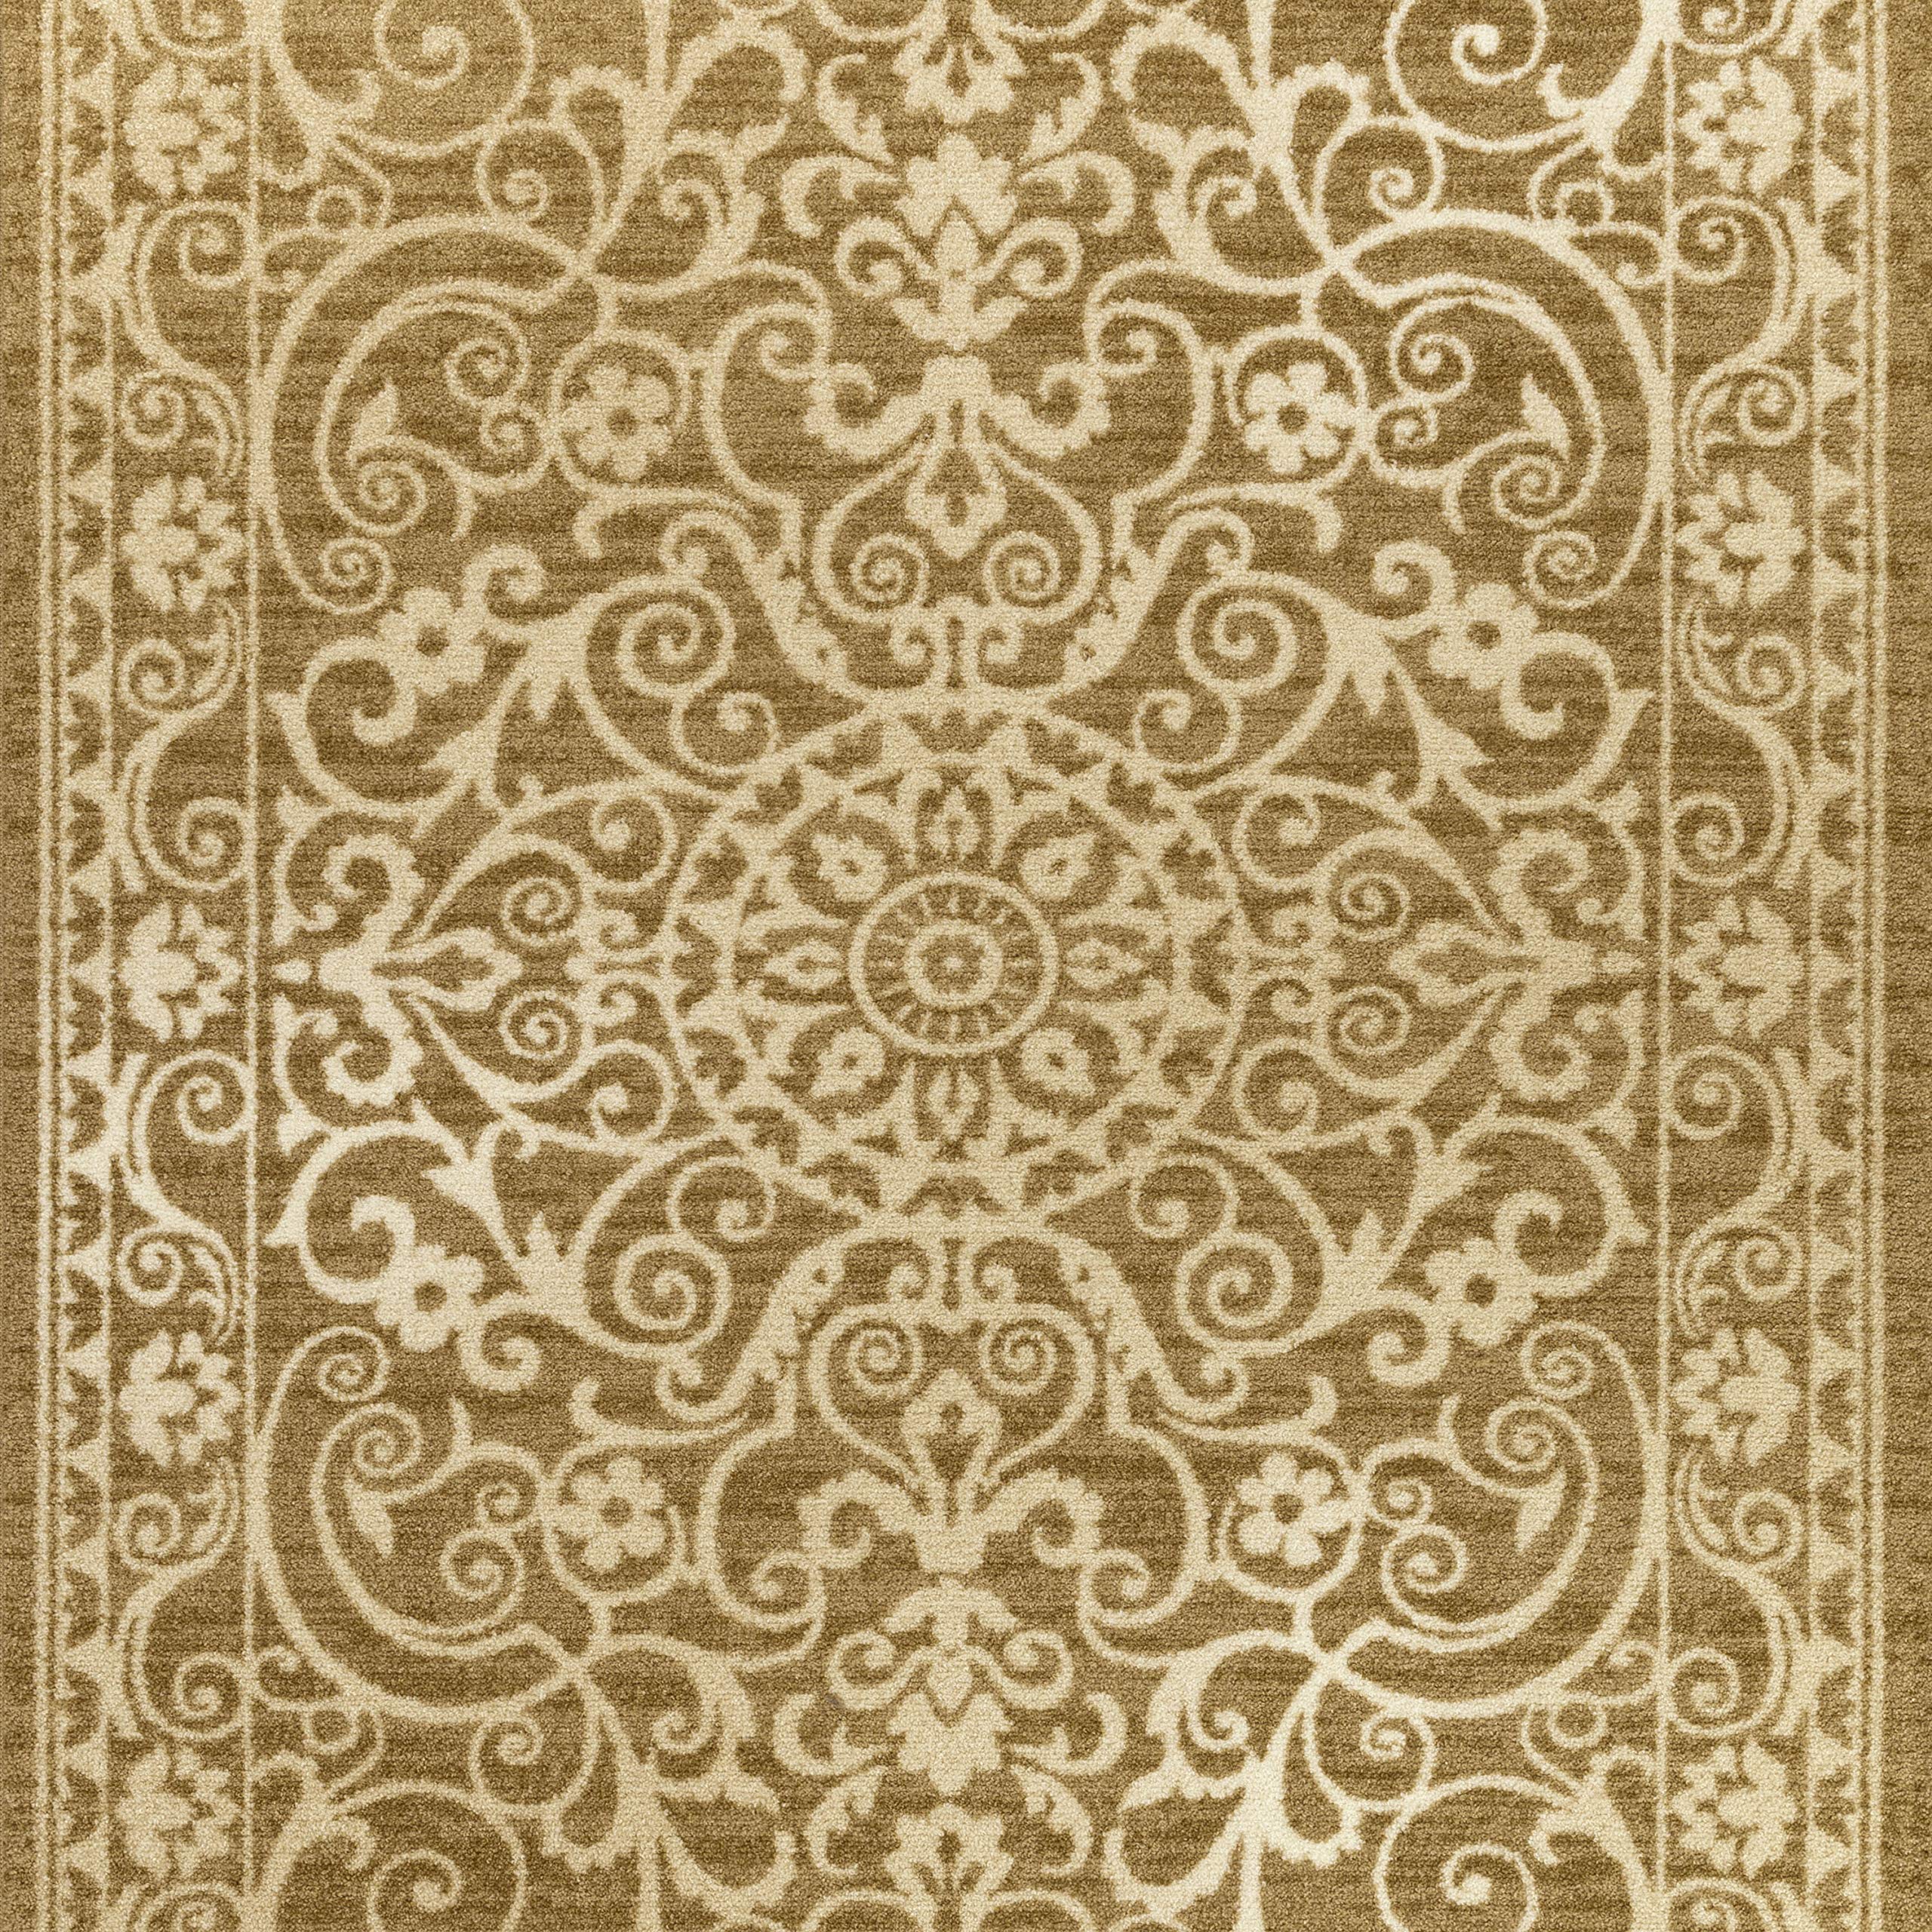 Maples Rugs Pelham Vintage Kitchen Rugs Non Skid Accent Area Carpet [Made in USA], 2'6 x 3'10, Khaki, Model:AG4055401